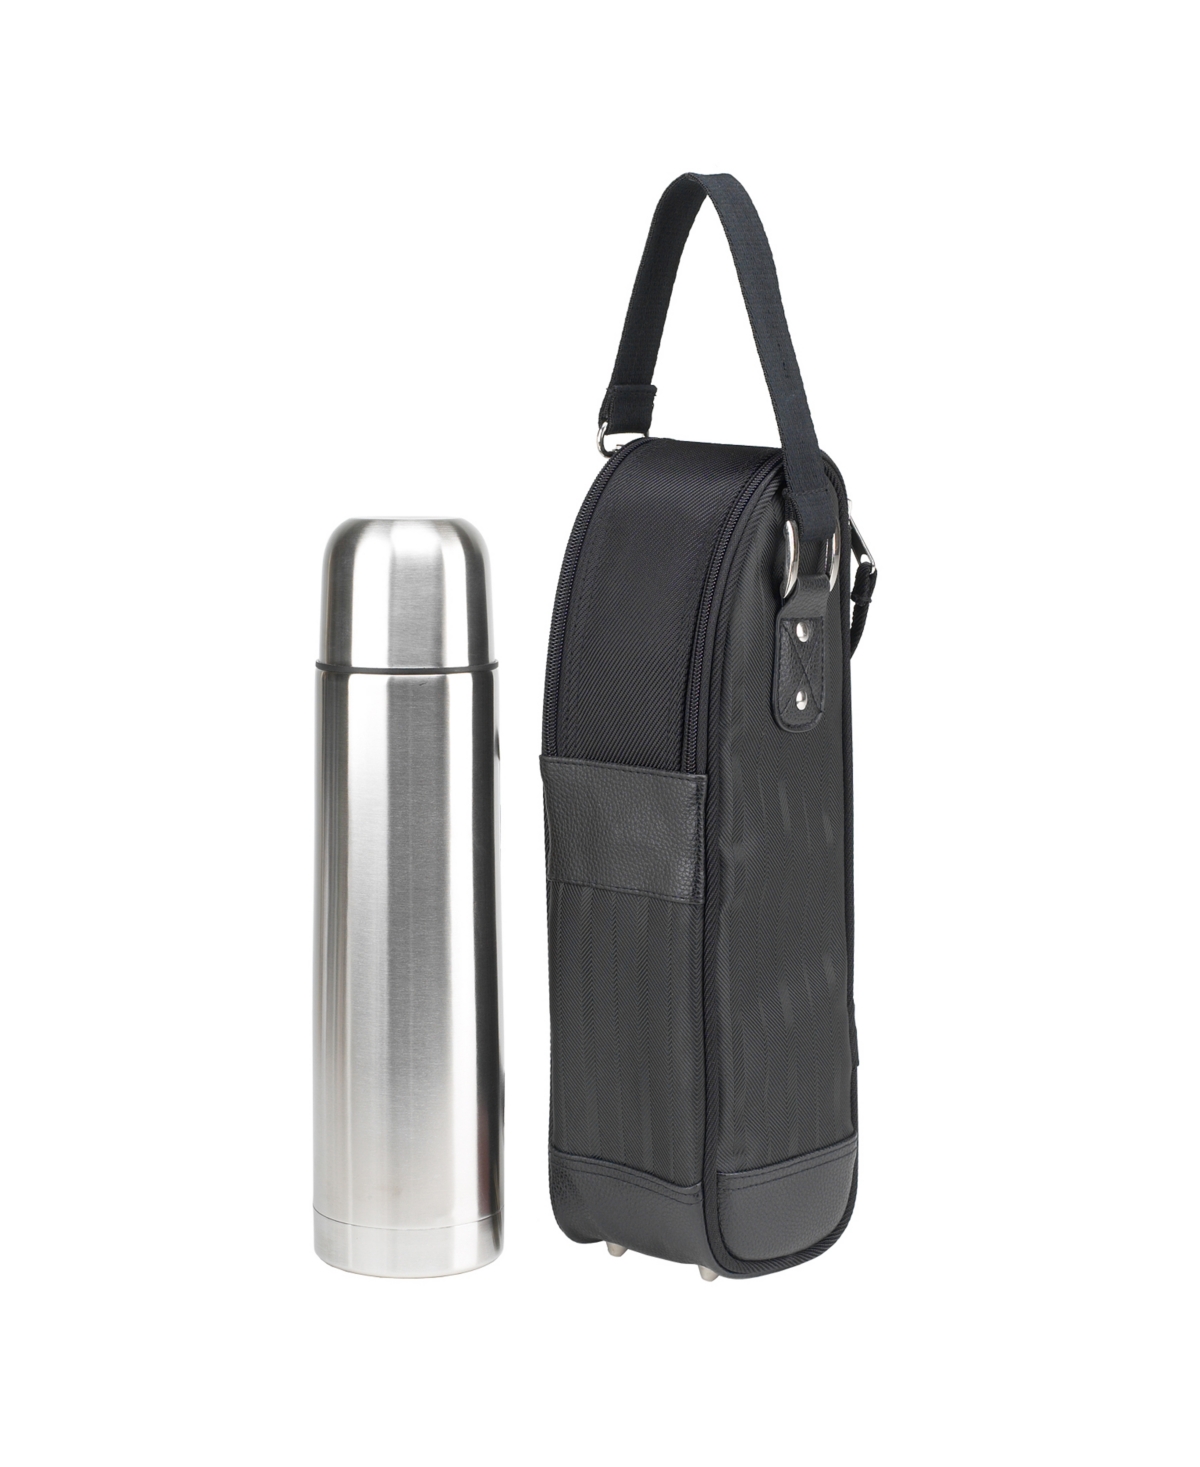 Stylish Coffee Tote with Thermal Flask - Black